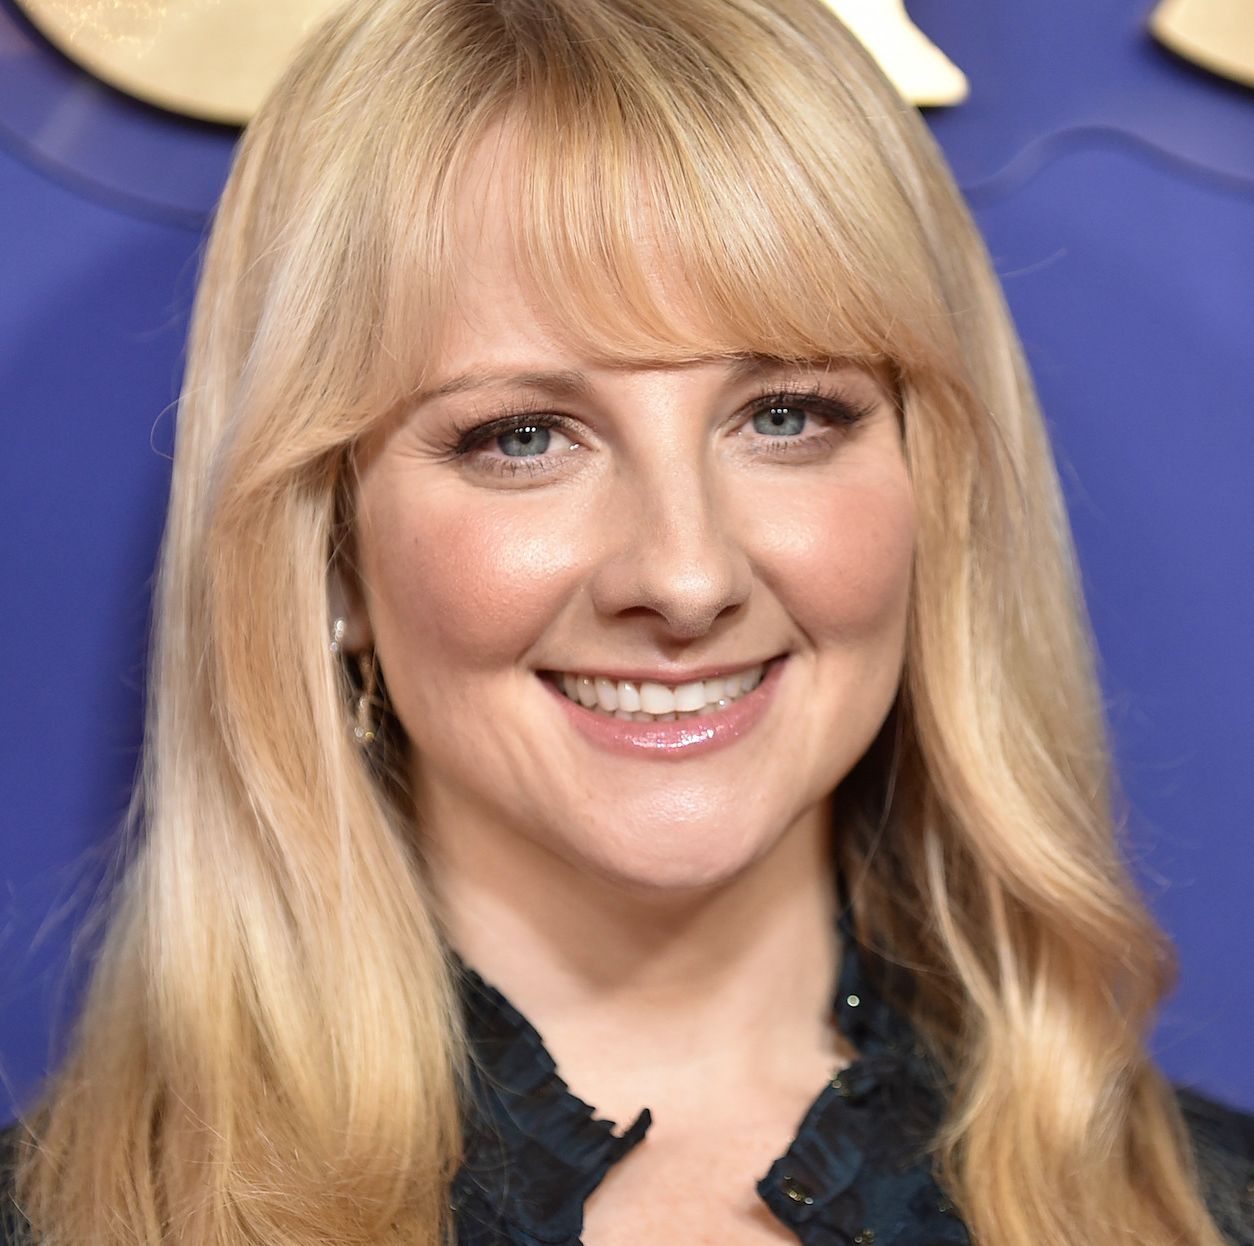 'Big Bang Theory' Fans, Melissa Rauch Sent Kaley Cuoco a Sweet Message About Her Baby